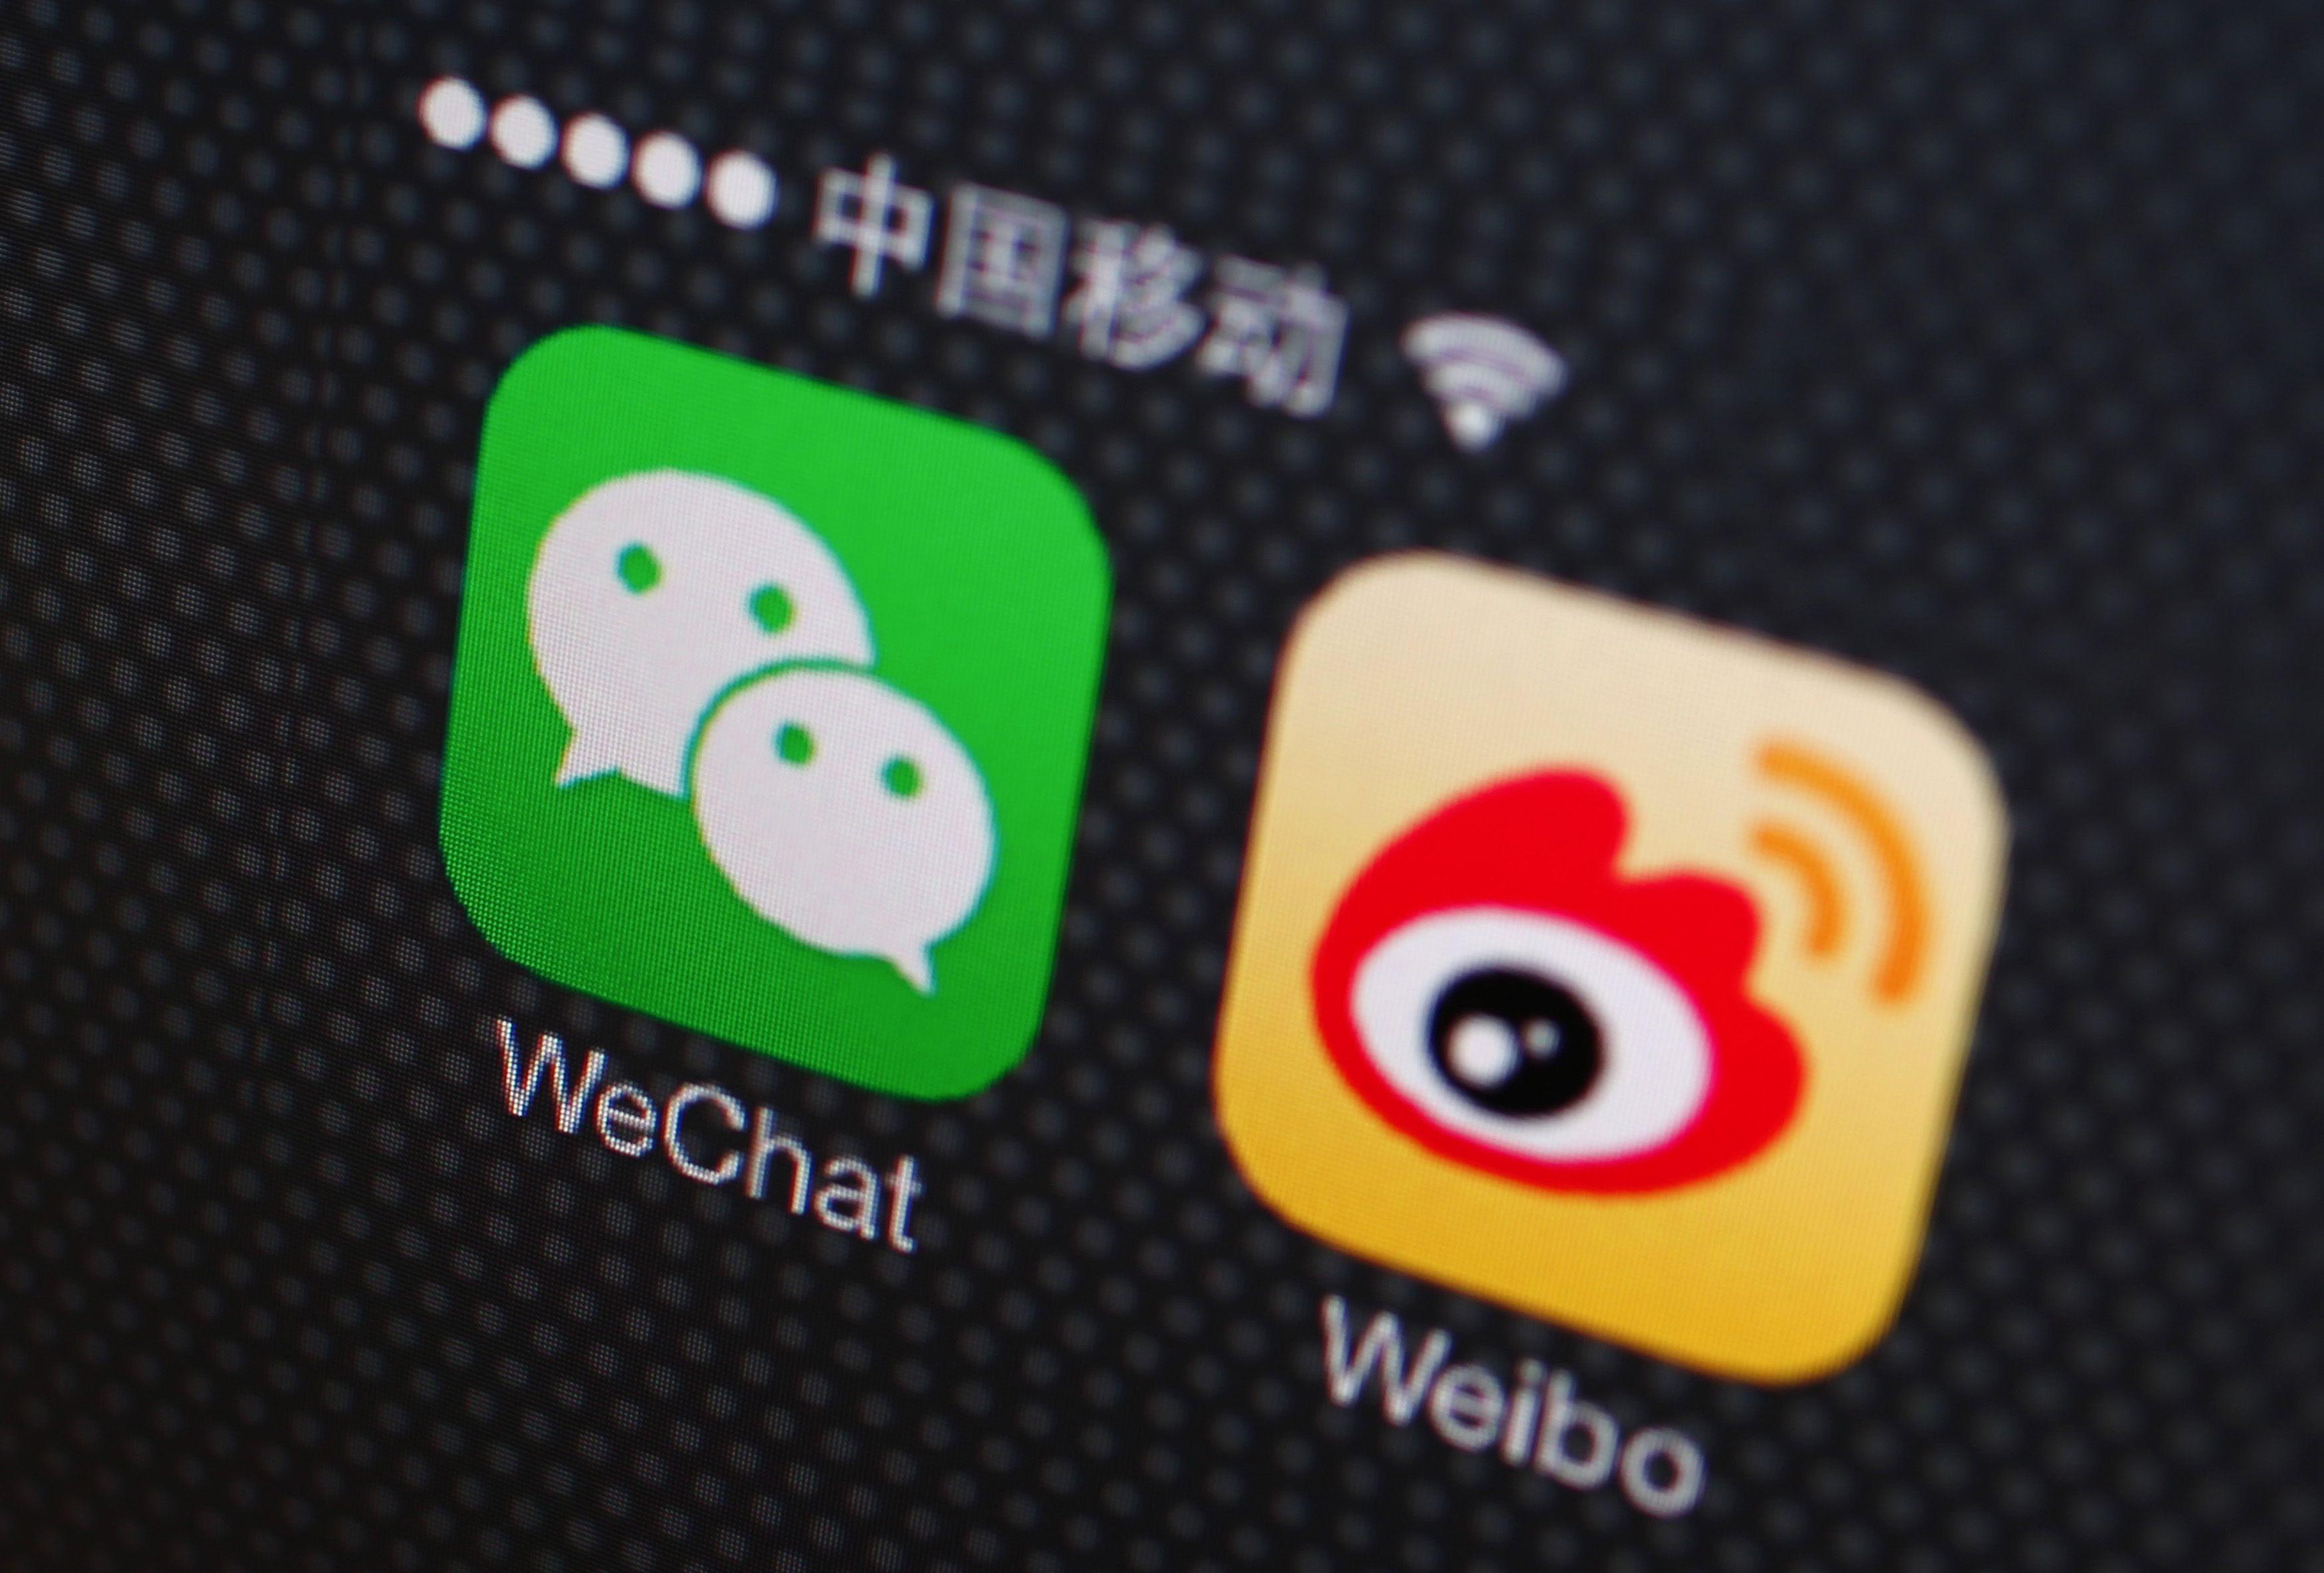 Weibo App Logo - China Investigating Tencent, Baidu and Weibo Over Cyber Laws